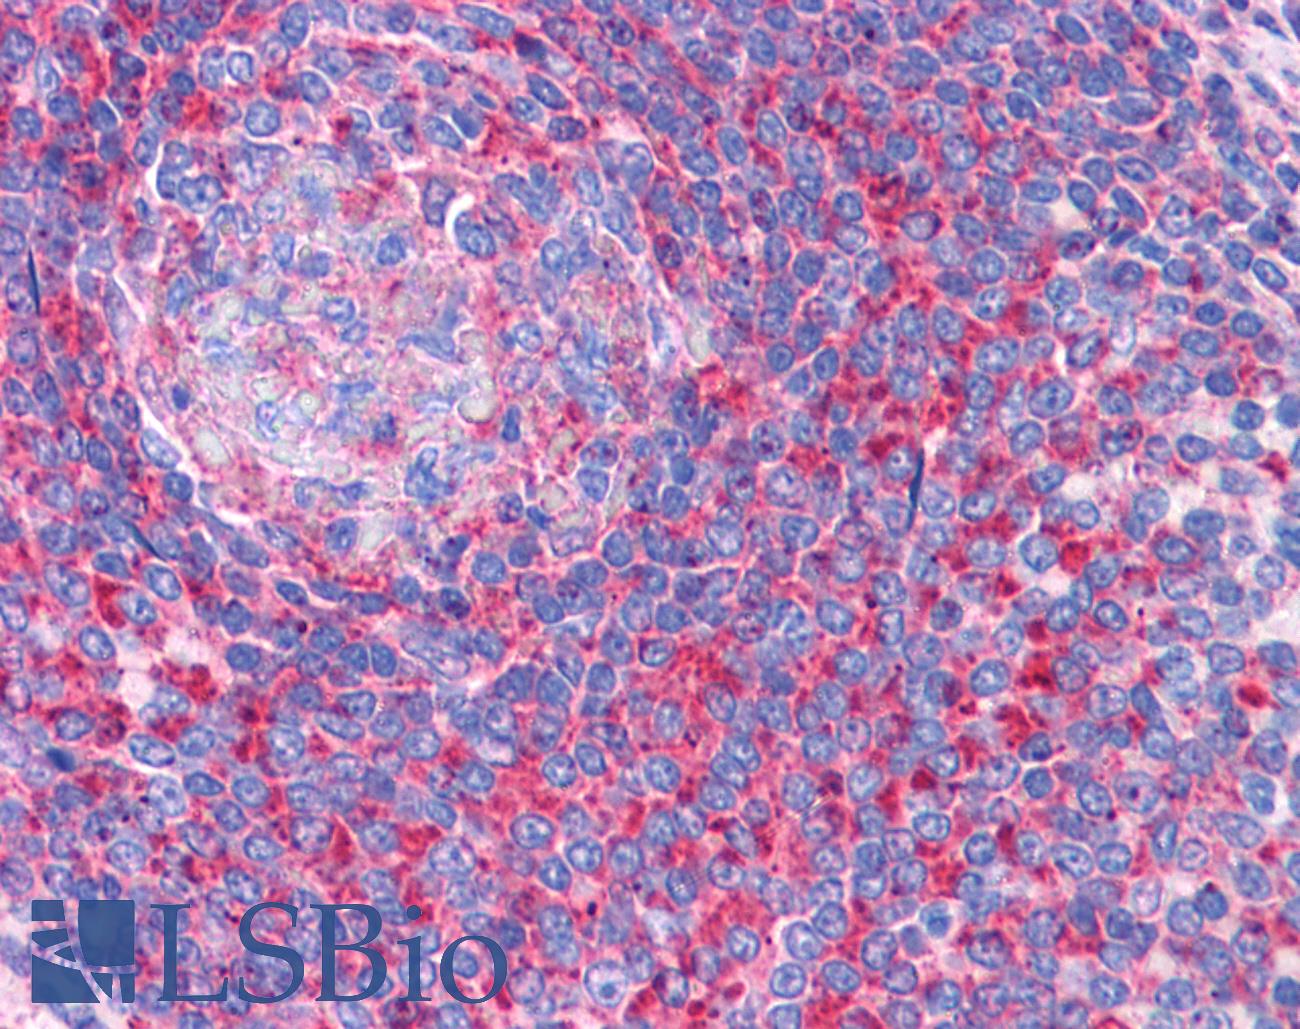 TPD52L2 / HD54 Antibody - Anti-TPD52L2 antibody IHC of human spleen. Immunohistochemistry of formalin-fixed, paraffin-embedded tissue after heat-induced antigen retrieval. Antibody concentration 3.75 ug/ml.